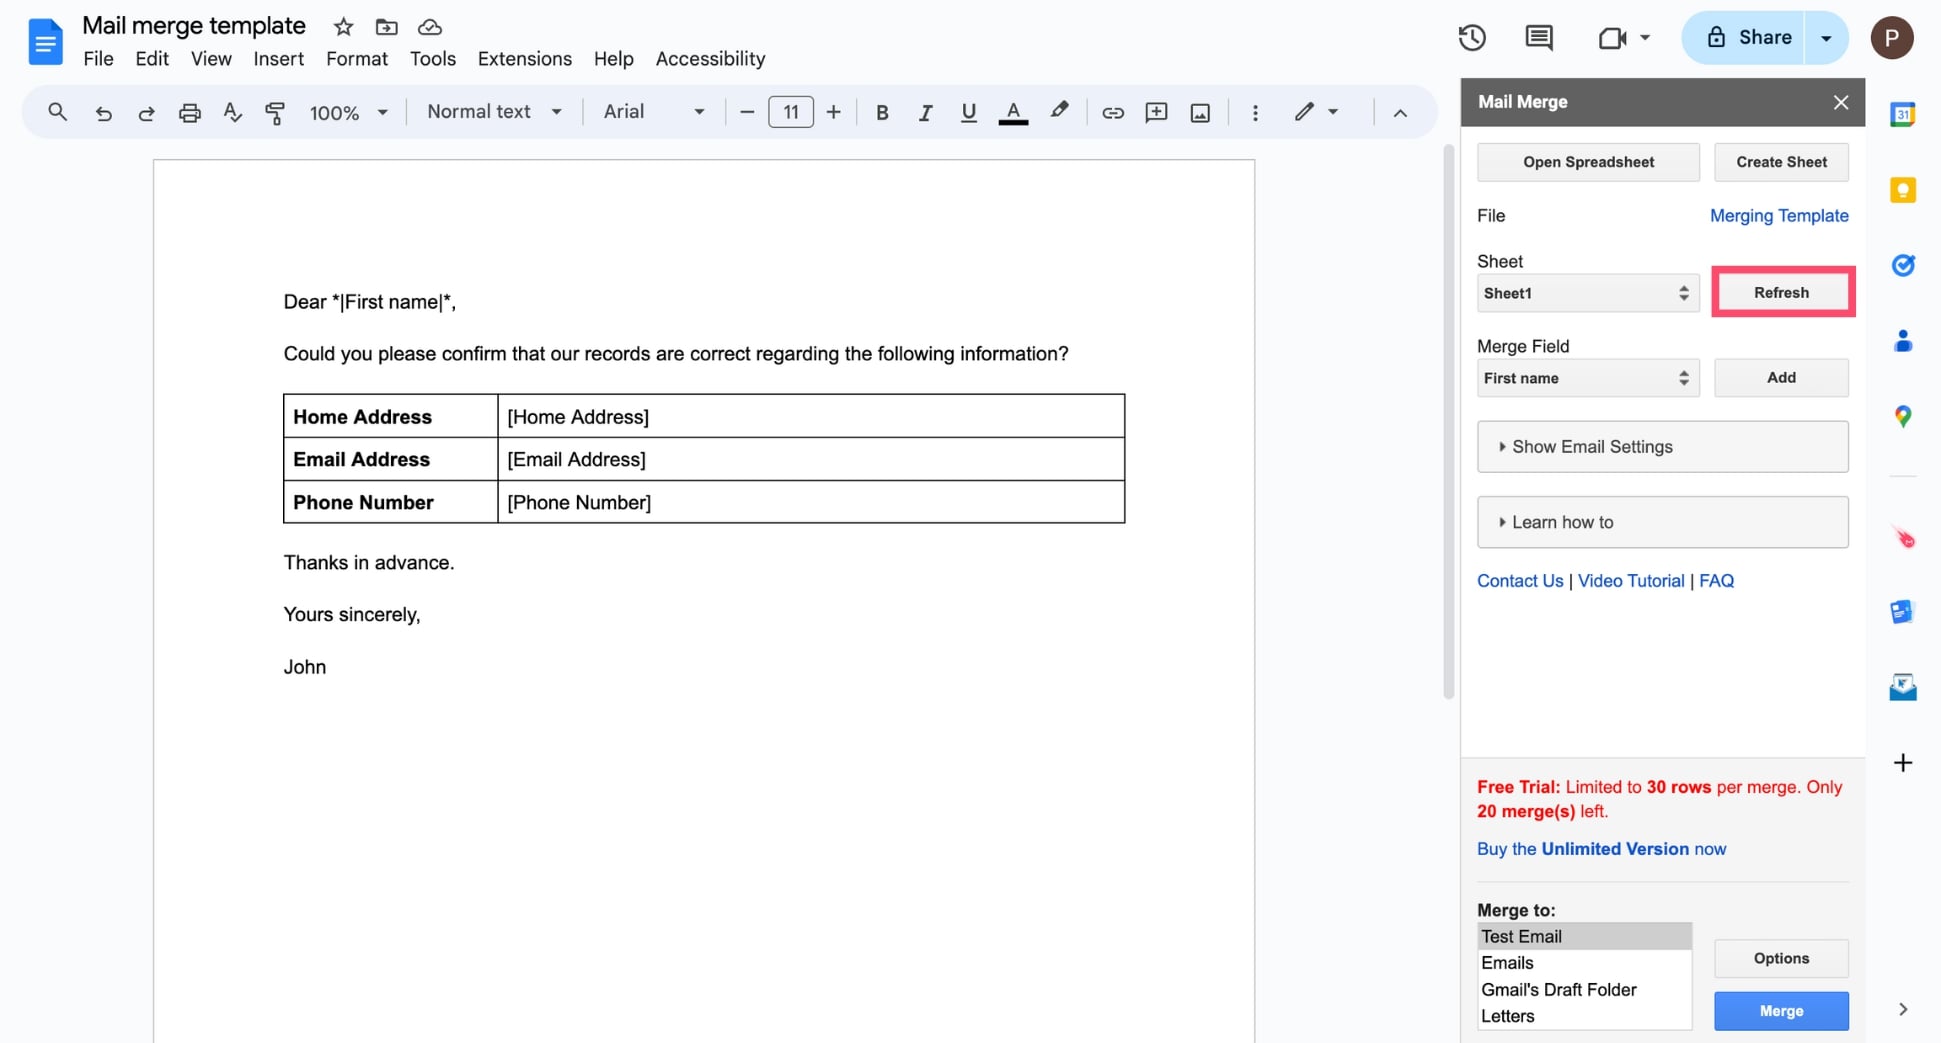 Sync your document with your data source in Google Docs